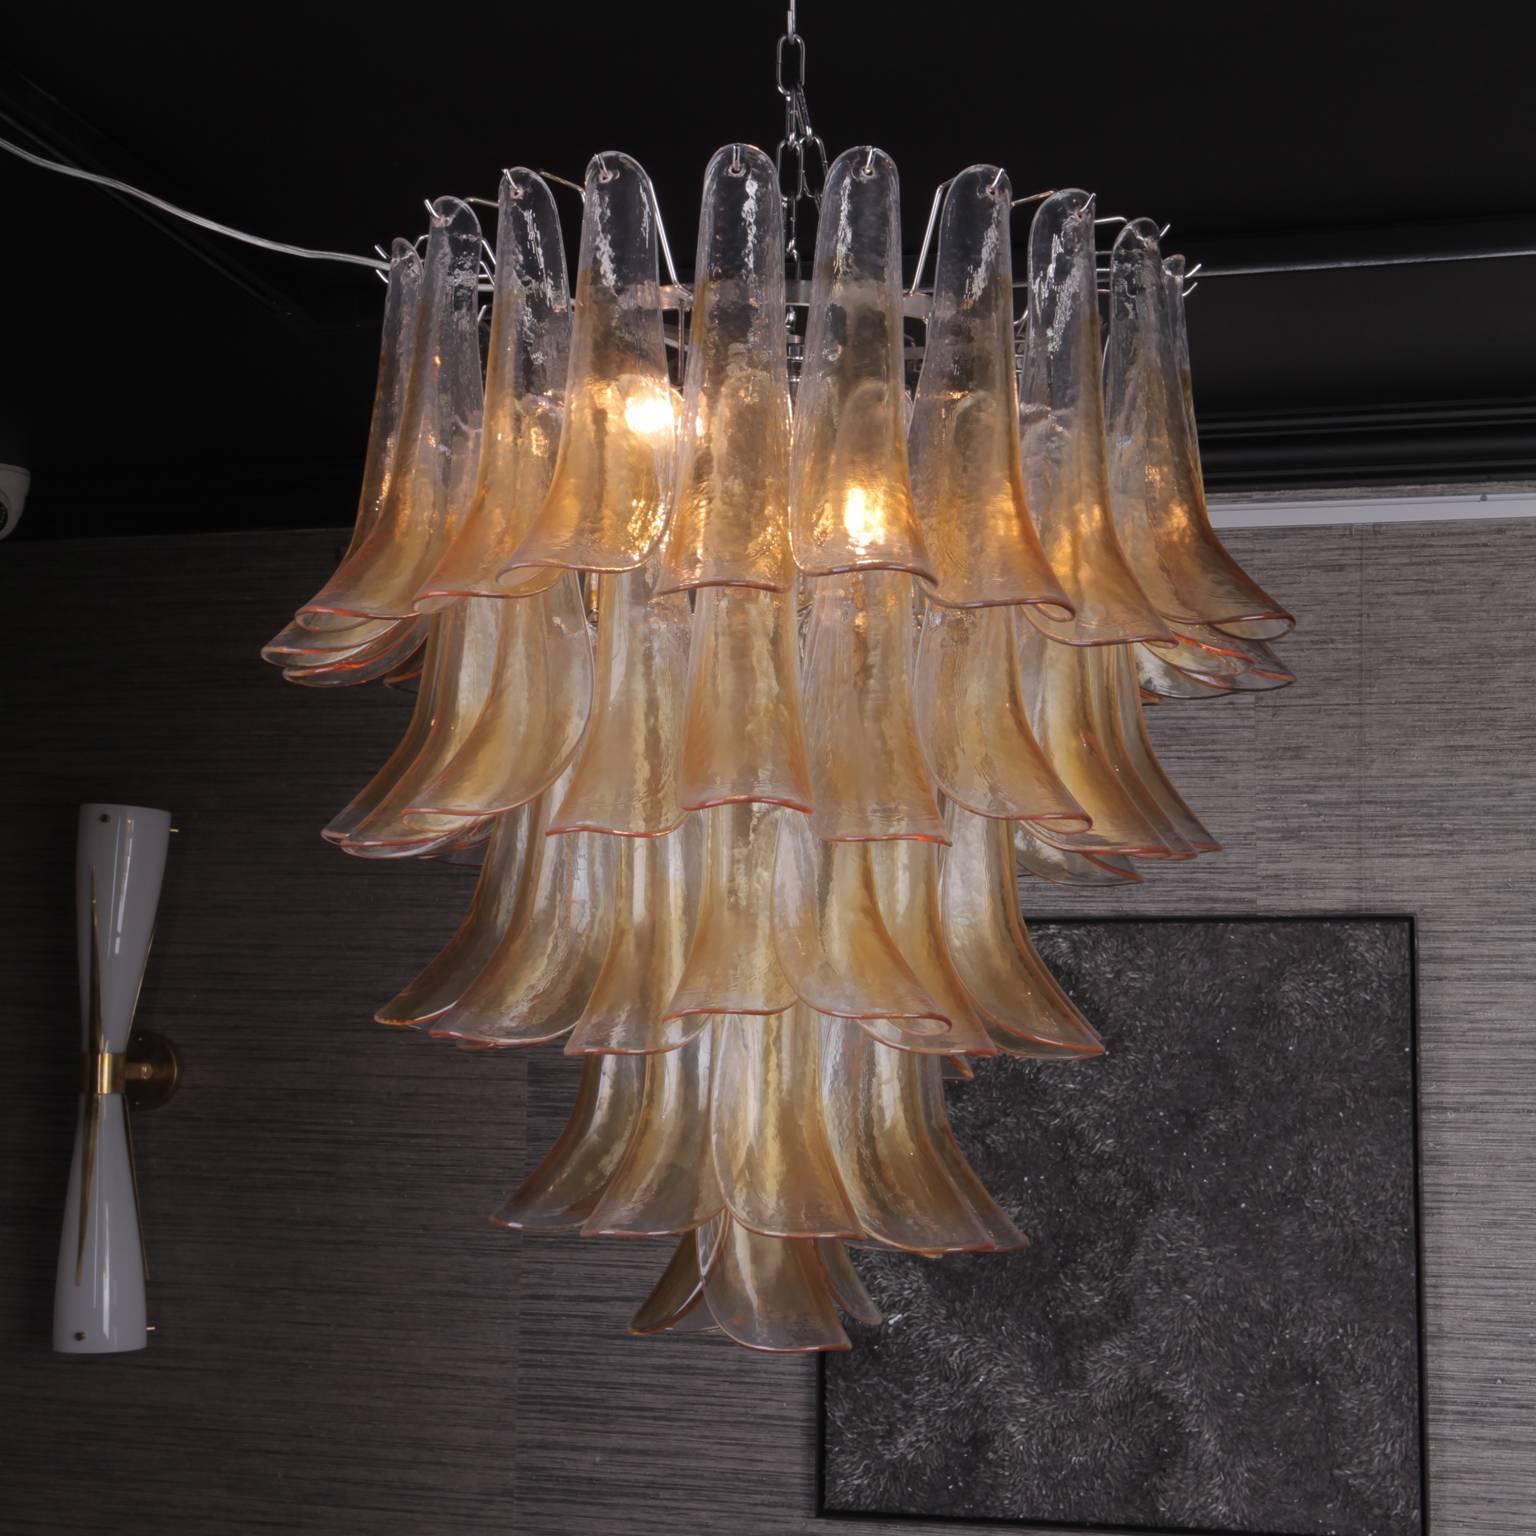 A five-tier chandelier made using original 1970s Murano glass which has been re-appropriated onto a new chrome frame.
Each petal was handblown giving a beautiful ripple detail to each piece, with an iridescent gold finish to the surface of the